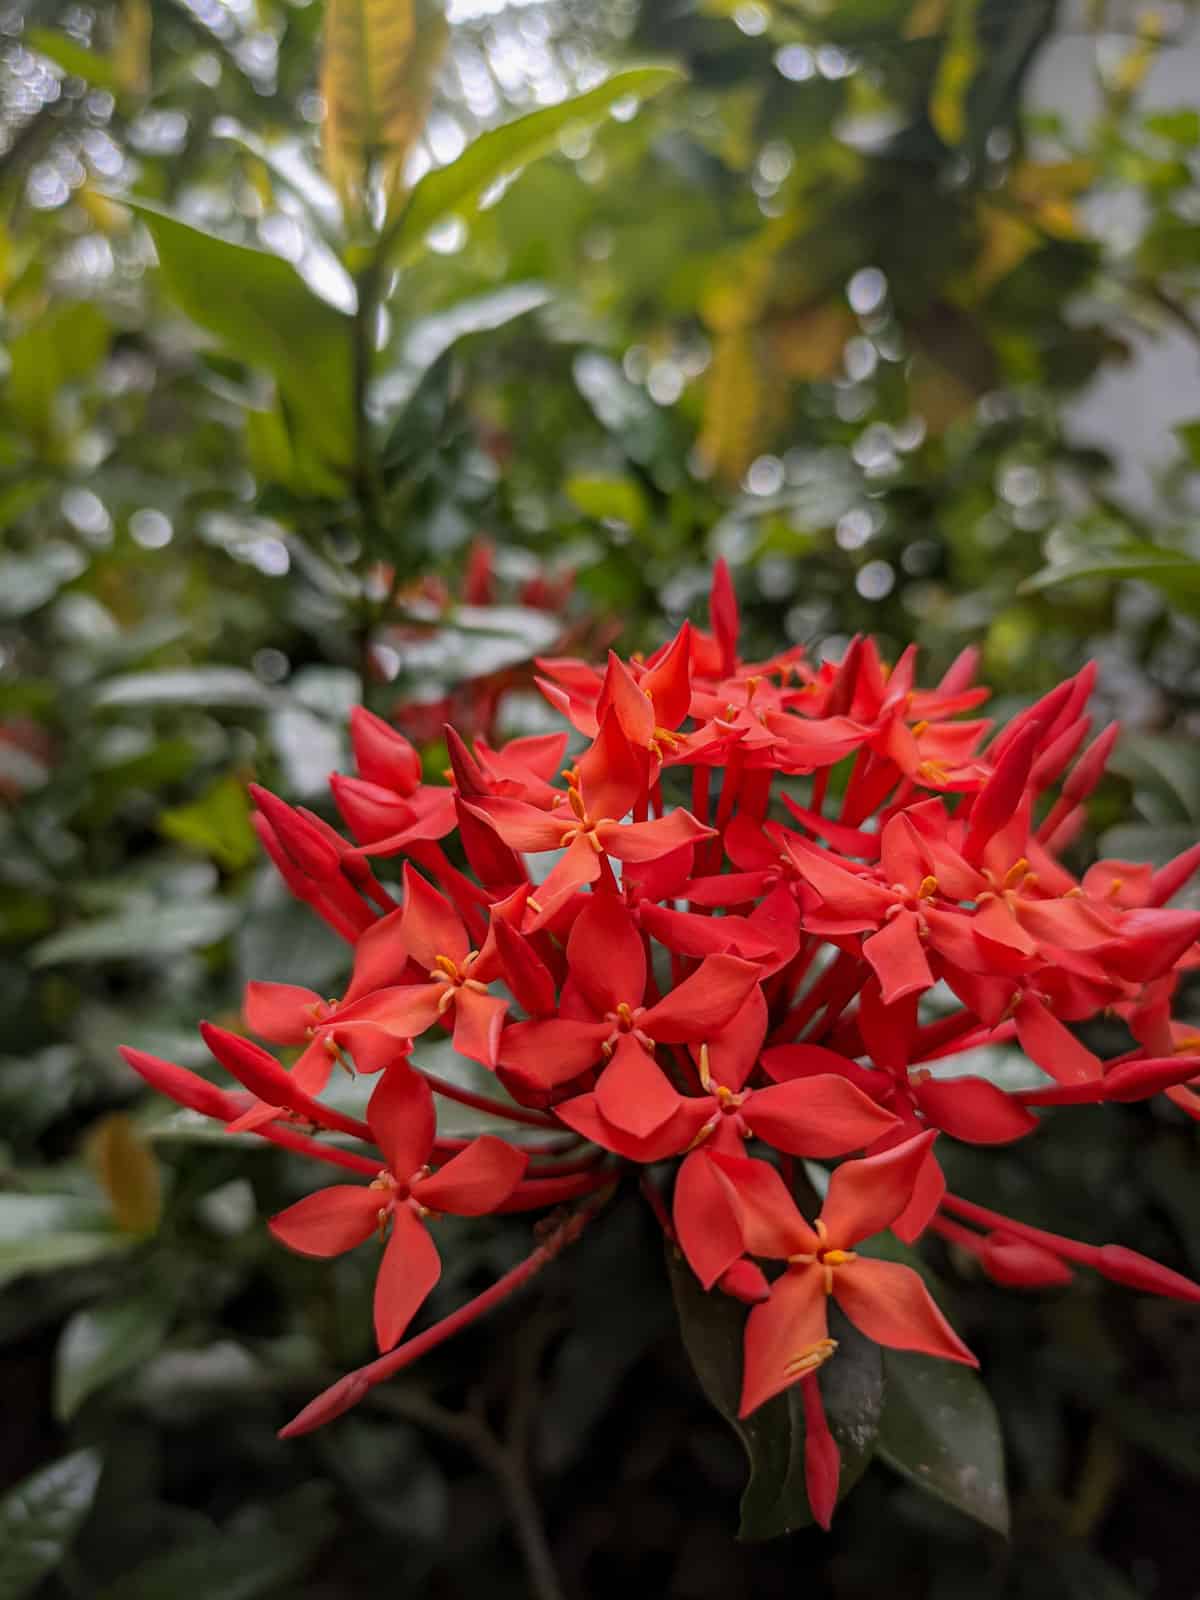 Tiny bright red leaves of an Ixora flower